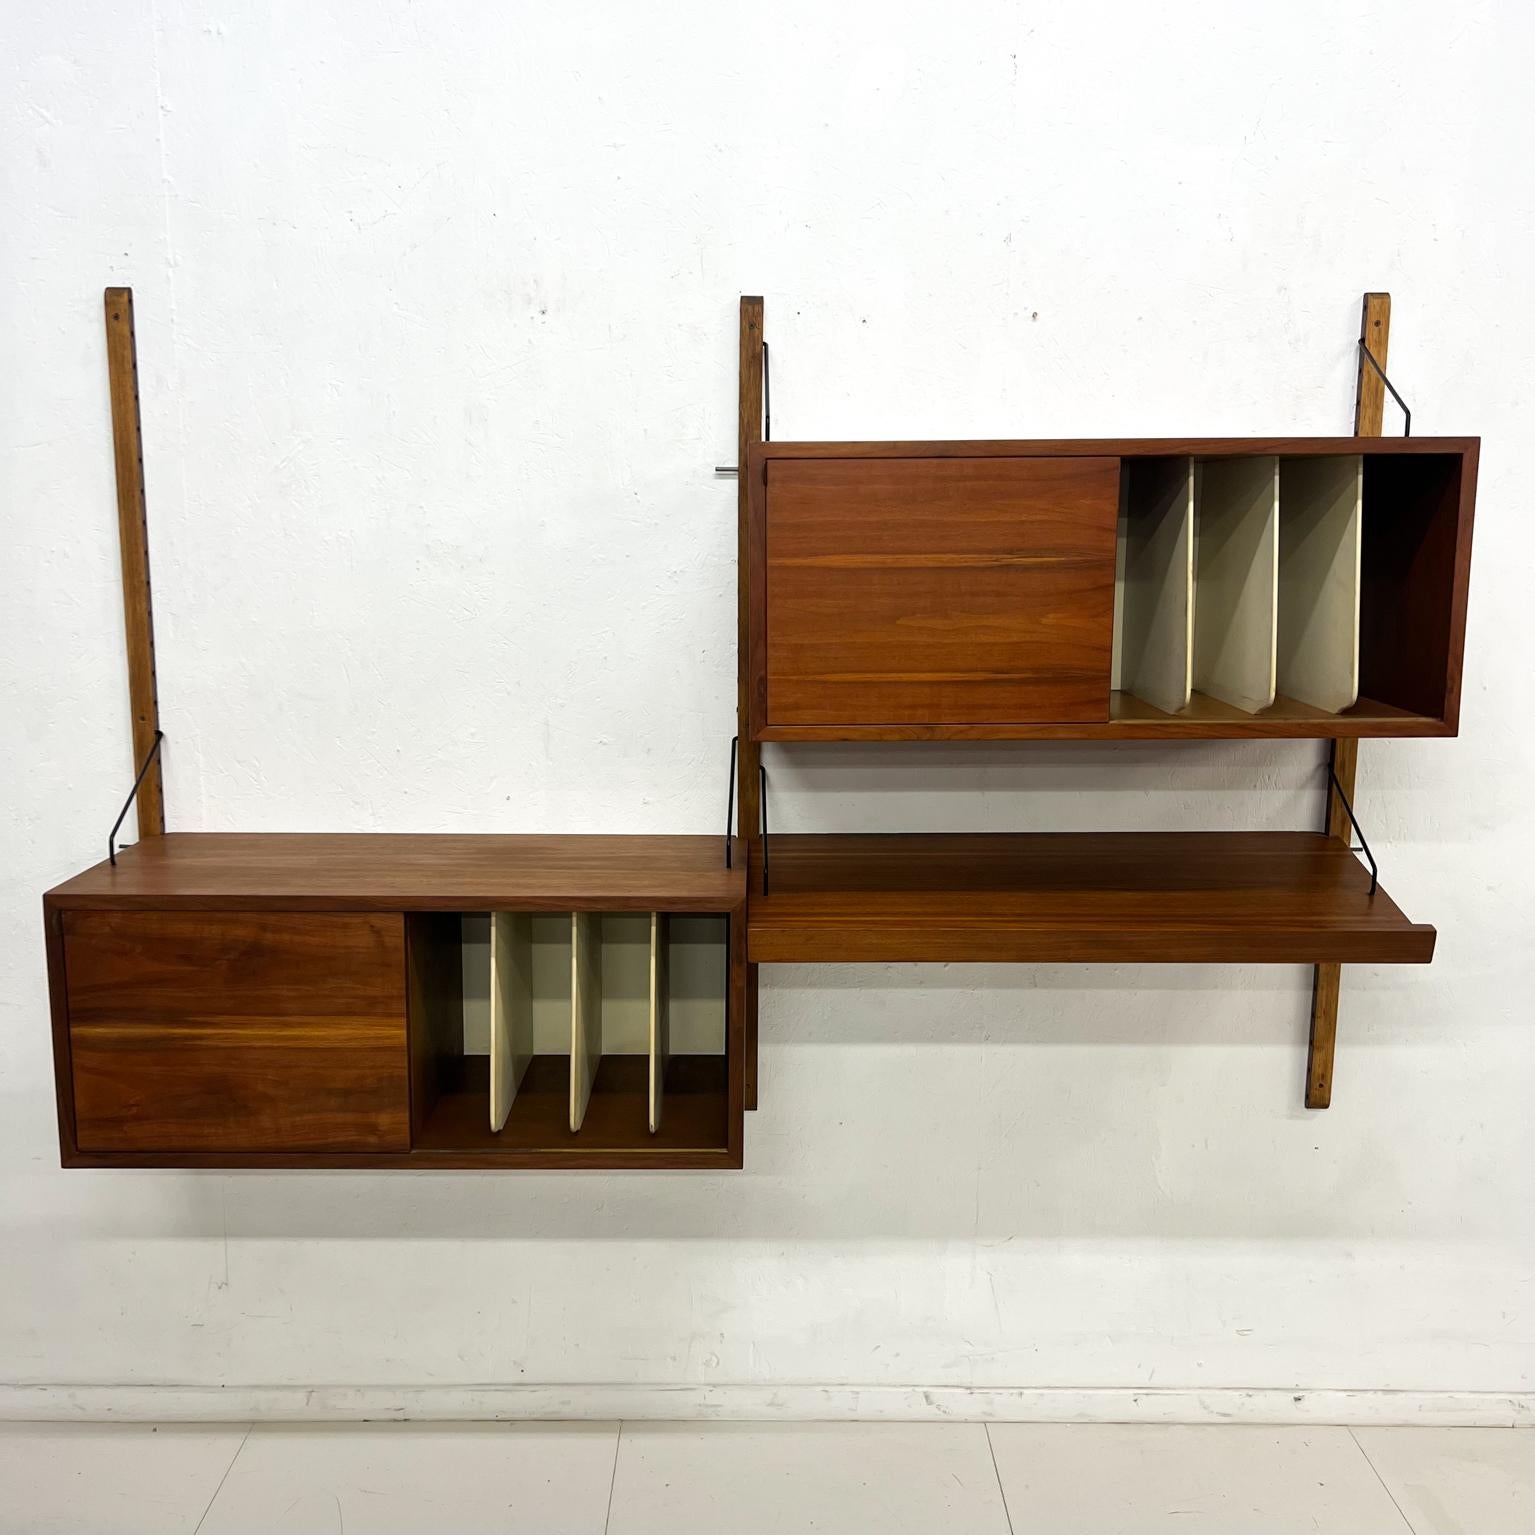 Vintage Scandinavian Modern wall unit system 2 bay in walnut wood.
Unmarked. Attribution Poul Cadovius for Royal System.
Two cabinets with sliding door. Space for records and open storage. 
One angle shelf. 
Measures: 73.5 wide x 49.5 tall (upright)